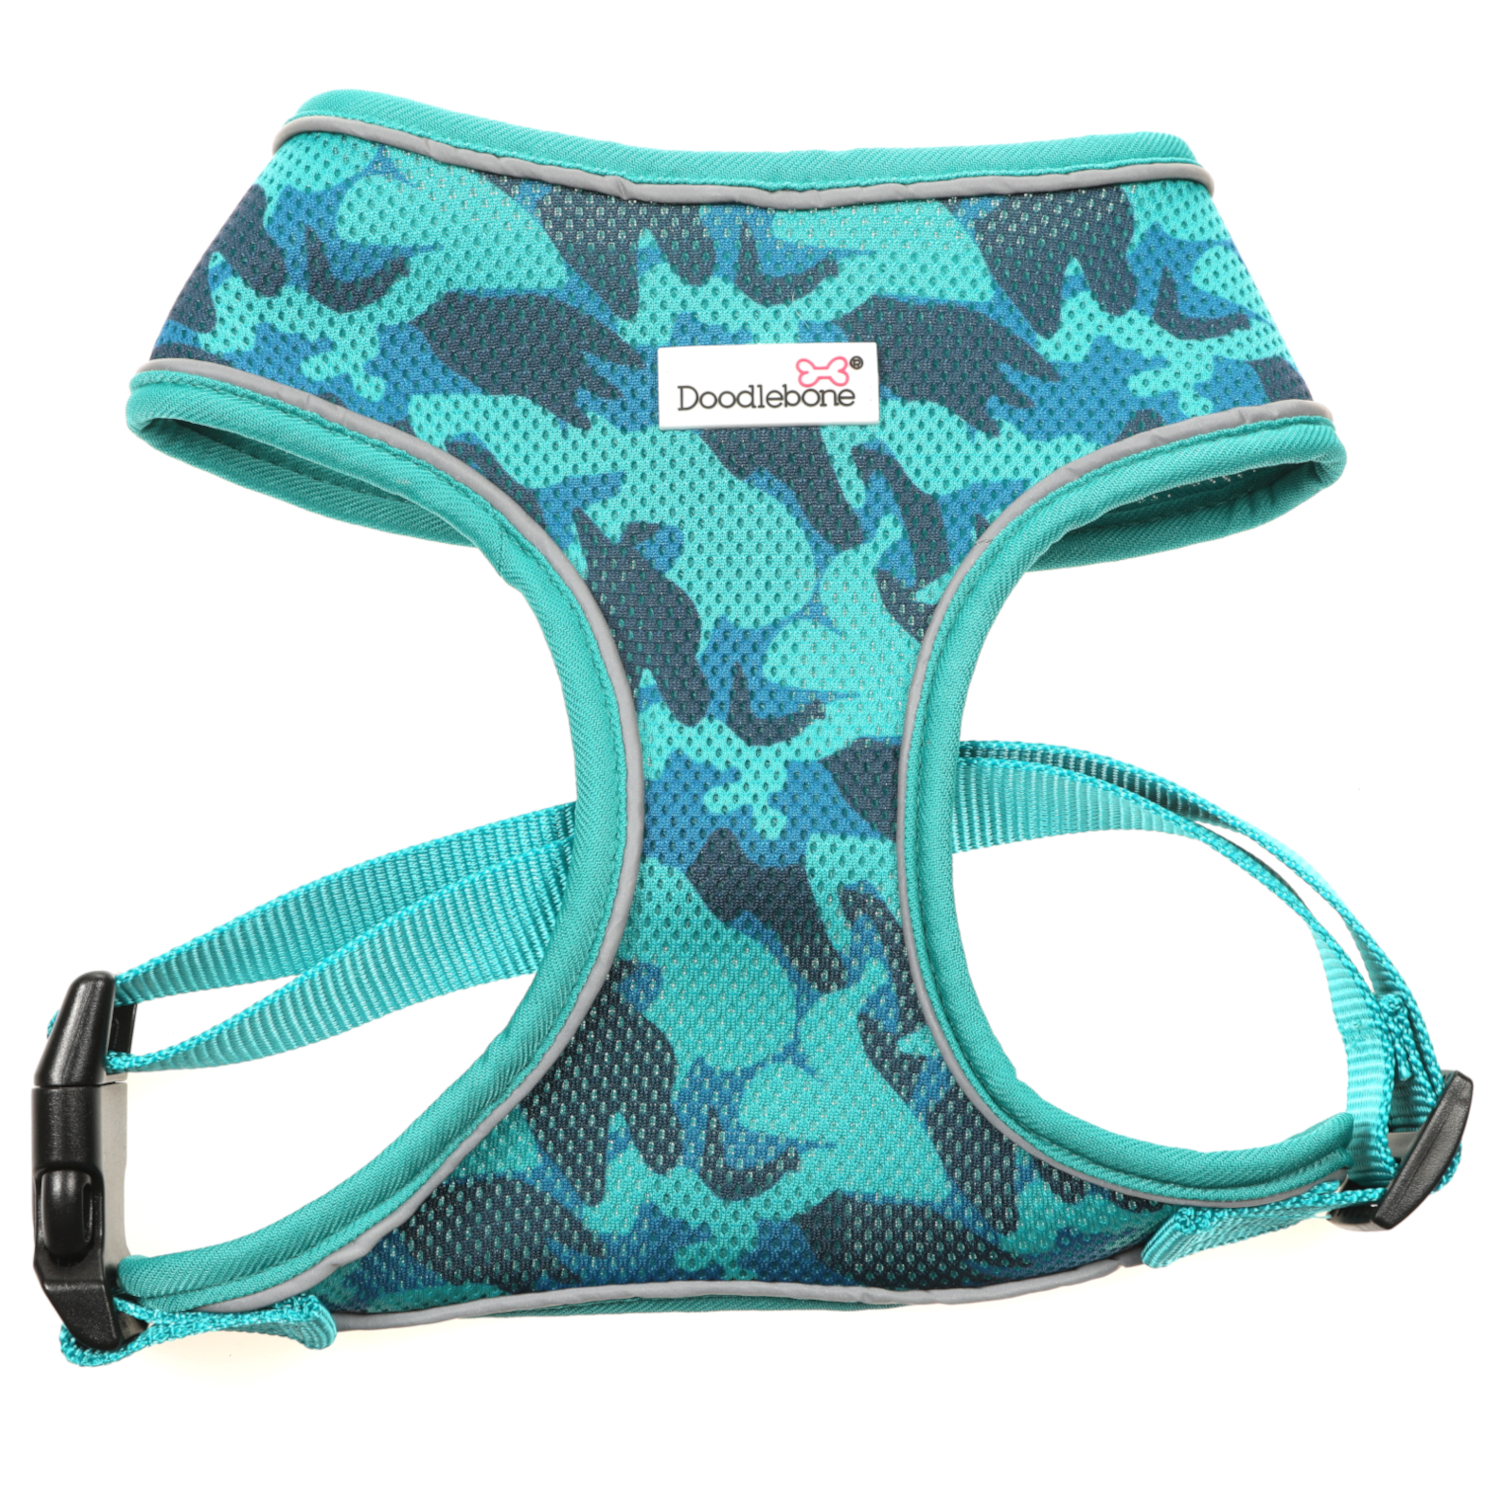 Clearance SALE Doodlebone Soft Strong Air Mesh Dog Harness.last few remaining